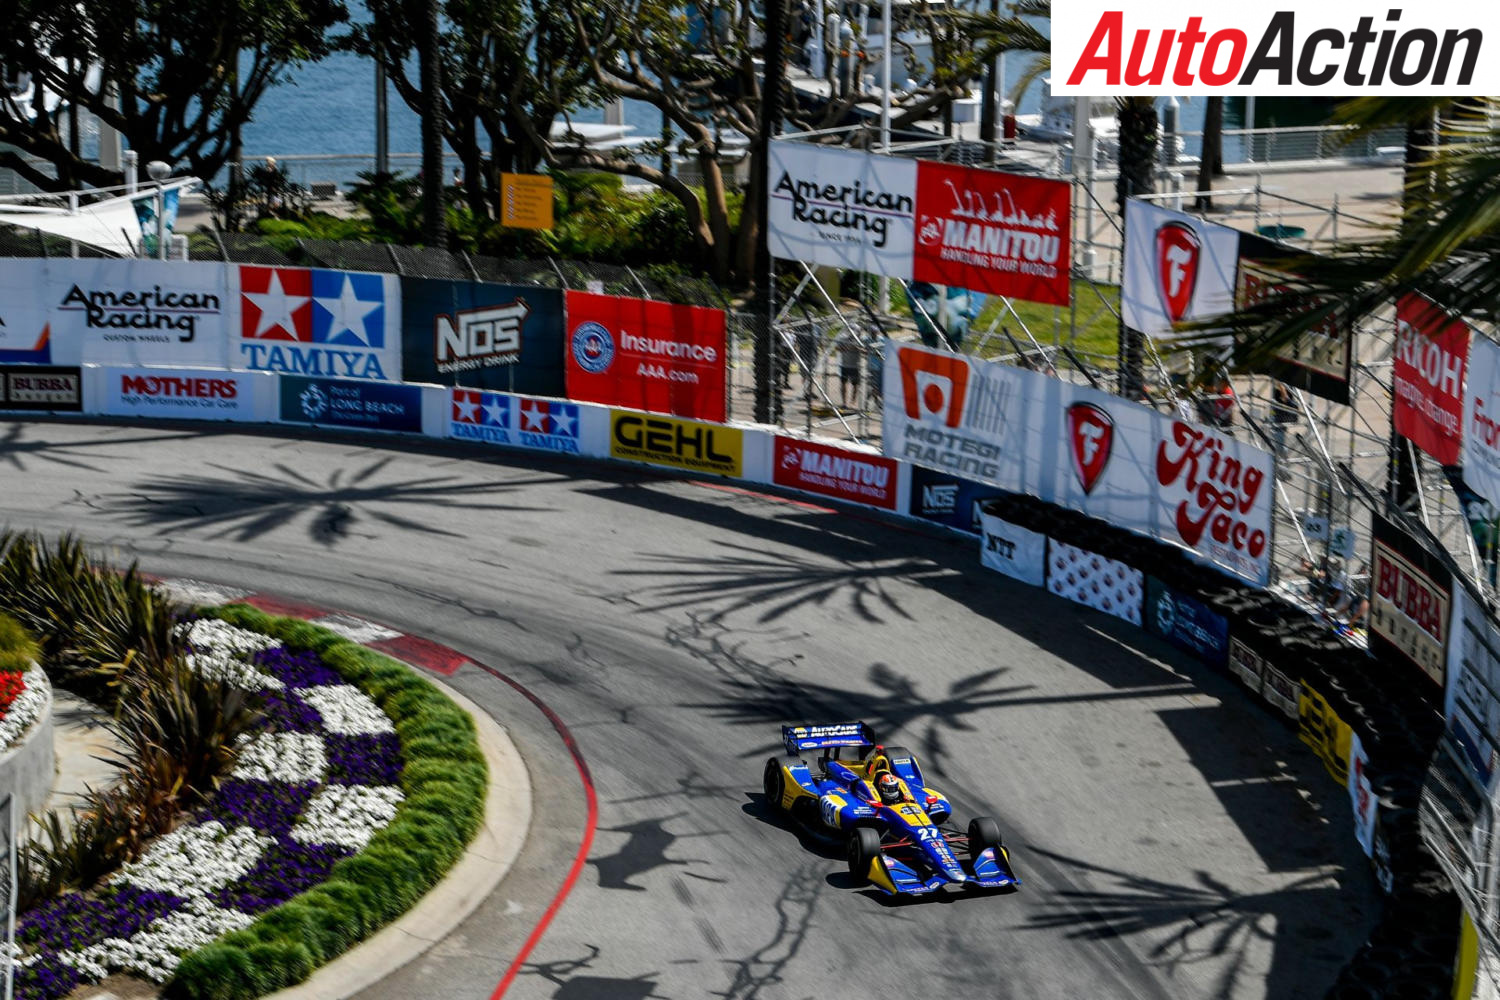 Alexander Rossi claimed his second Long Beach win - Photo: LAT